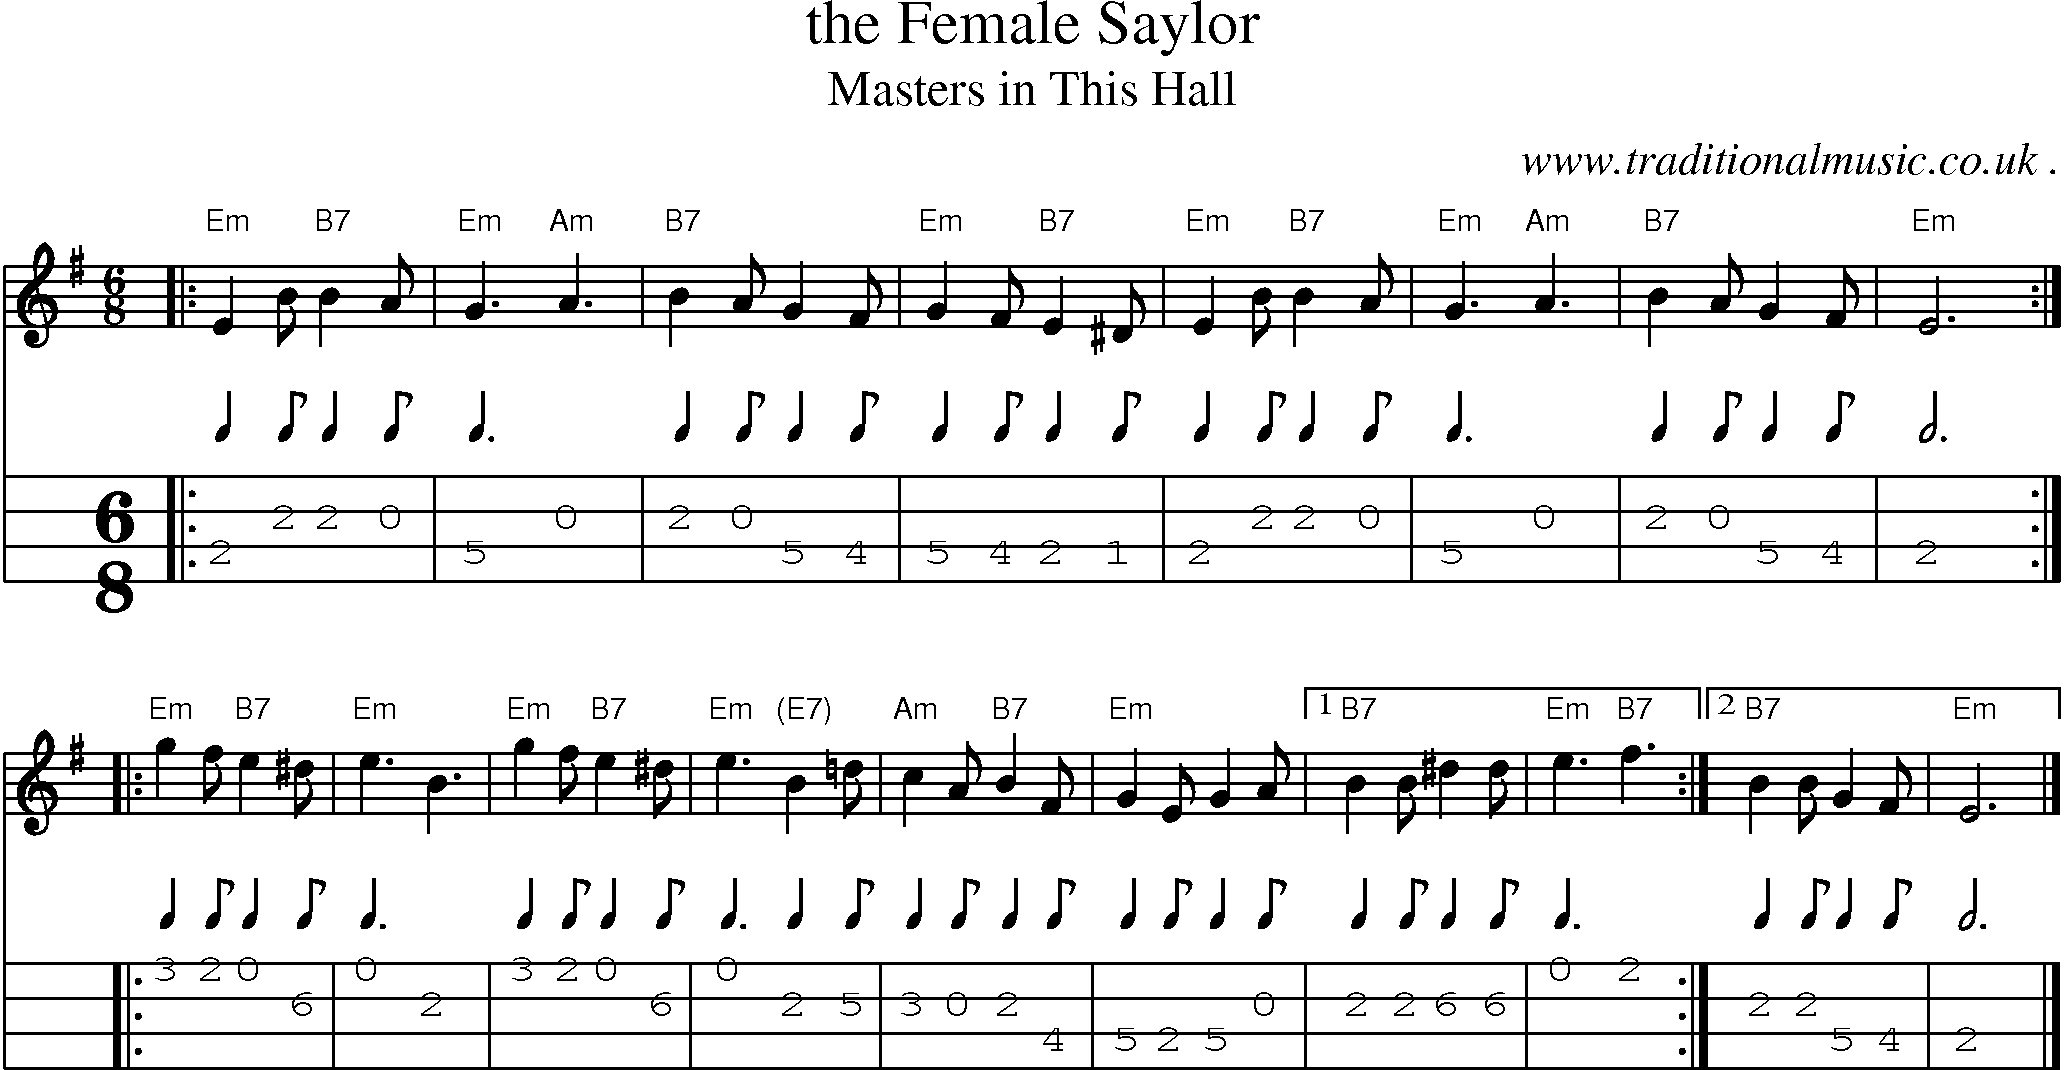 Sheet-music  score, Chords and Mandolin Tabs for The Female Saylor